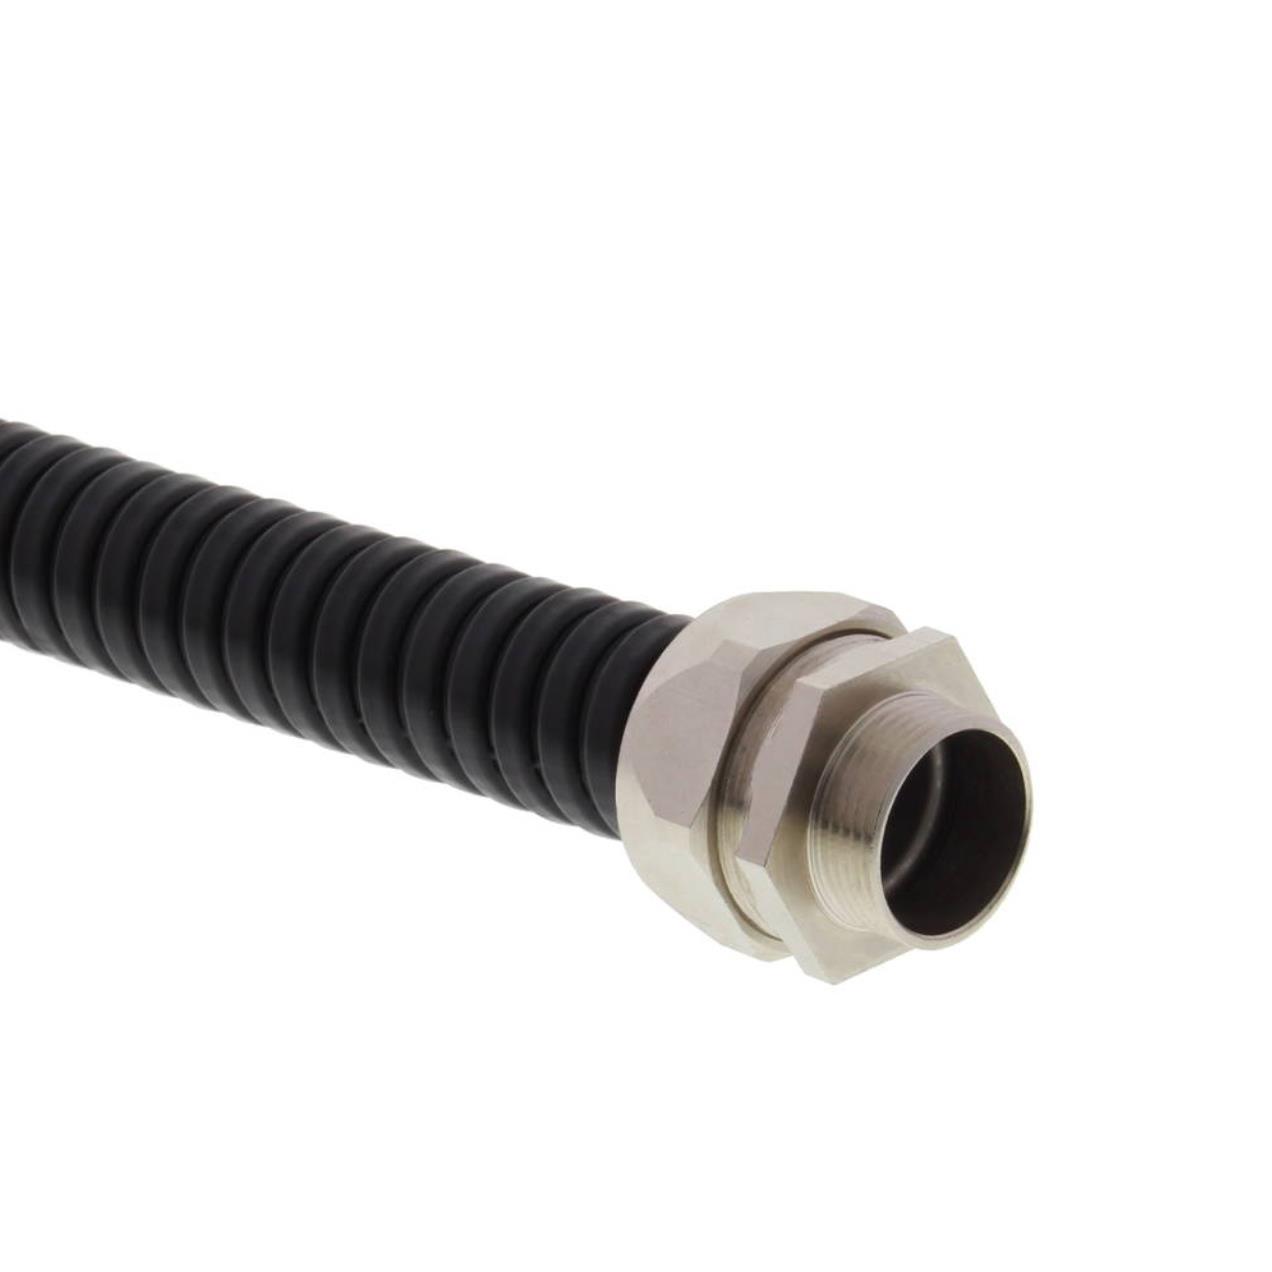 【BMCG-PU-C-40-BK】T-CONNECTOR FOR CORRUGATED PIPES